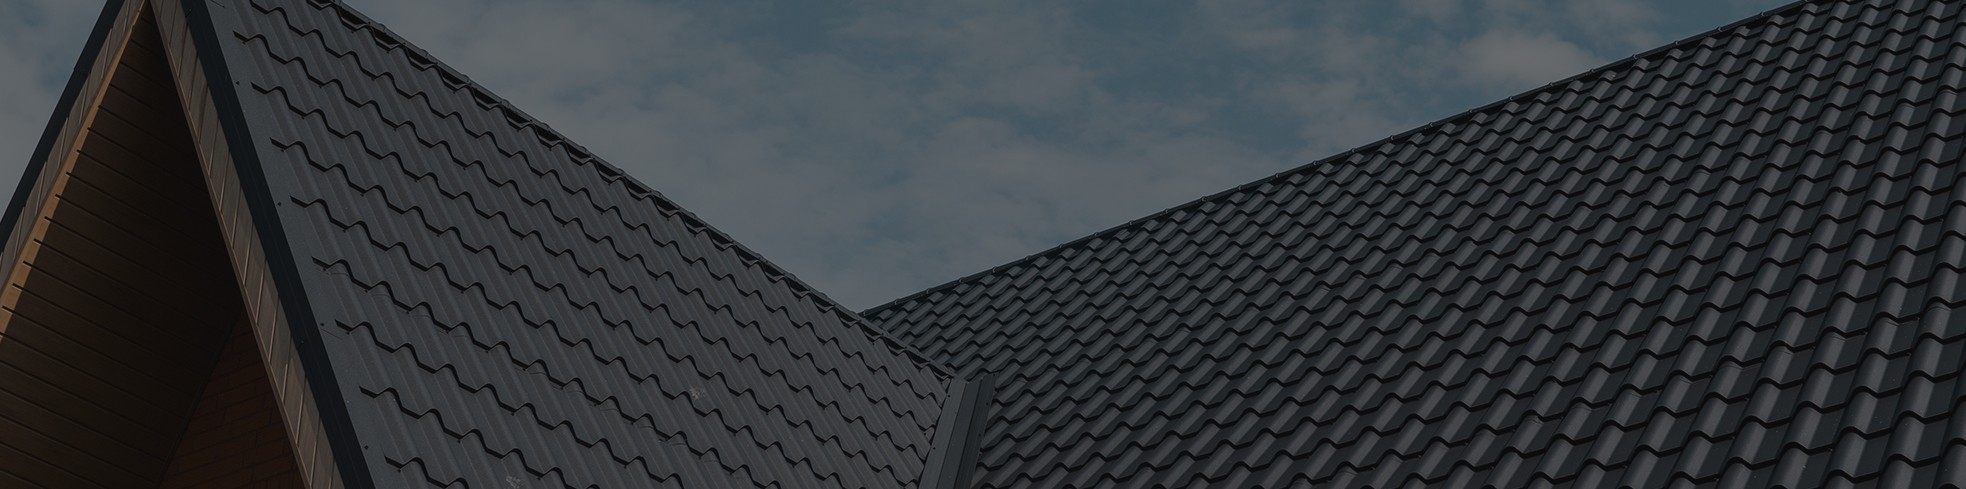 Fiberglass roofing services in Milwaukee, WI 